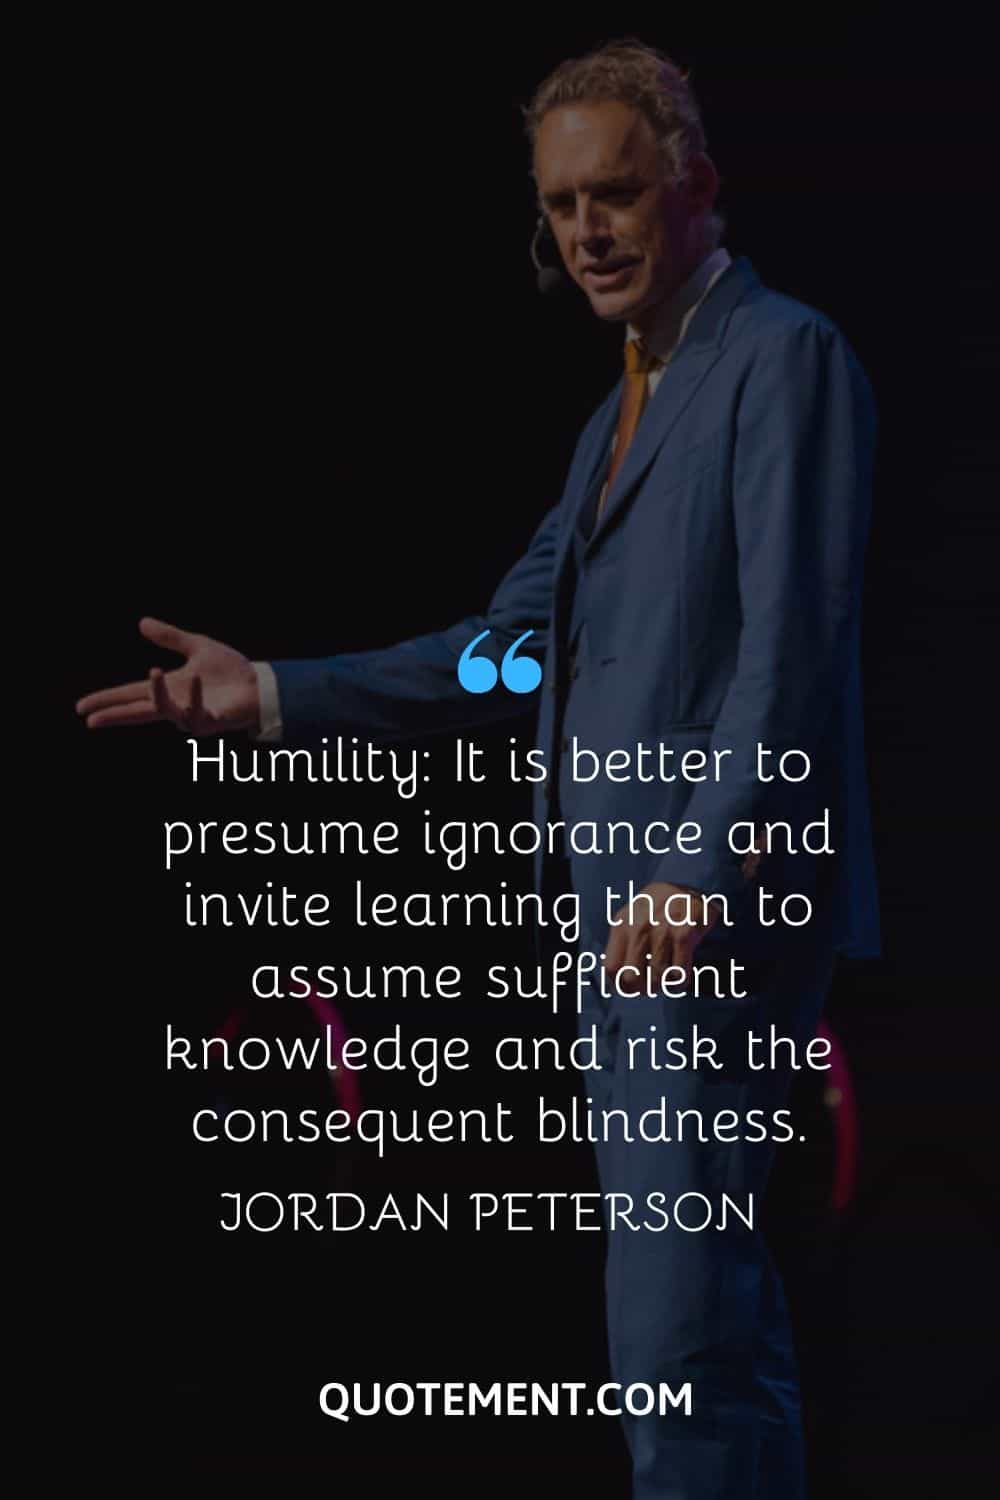 “Humility It is better to presume ignorance and invite learning than to assume sufficient knowledge and risk the consequent blindness.” — Jordan Peterson